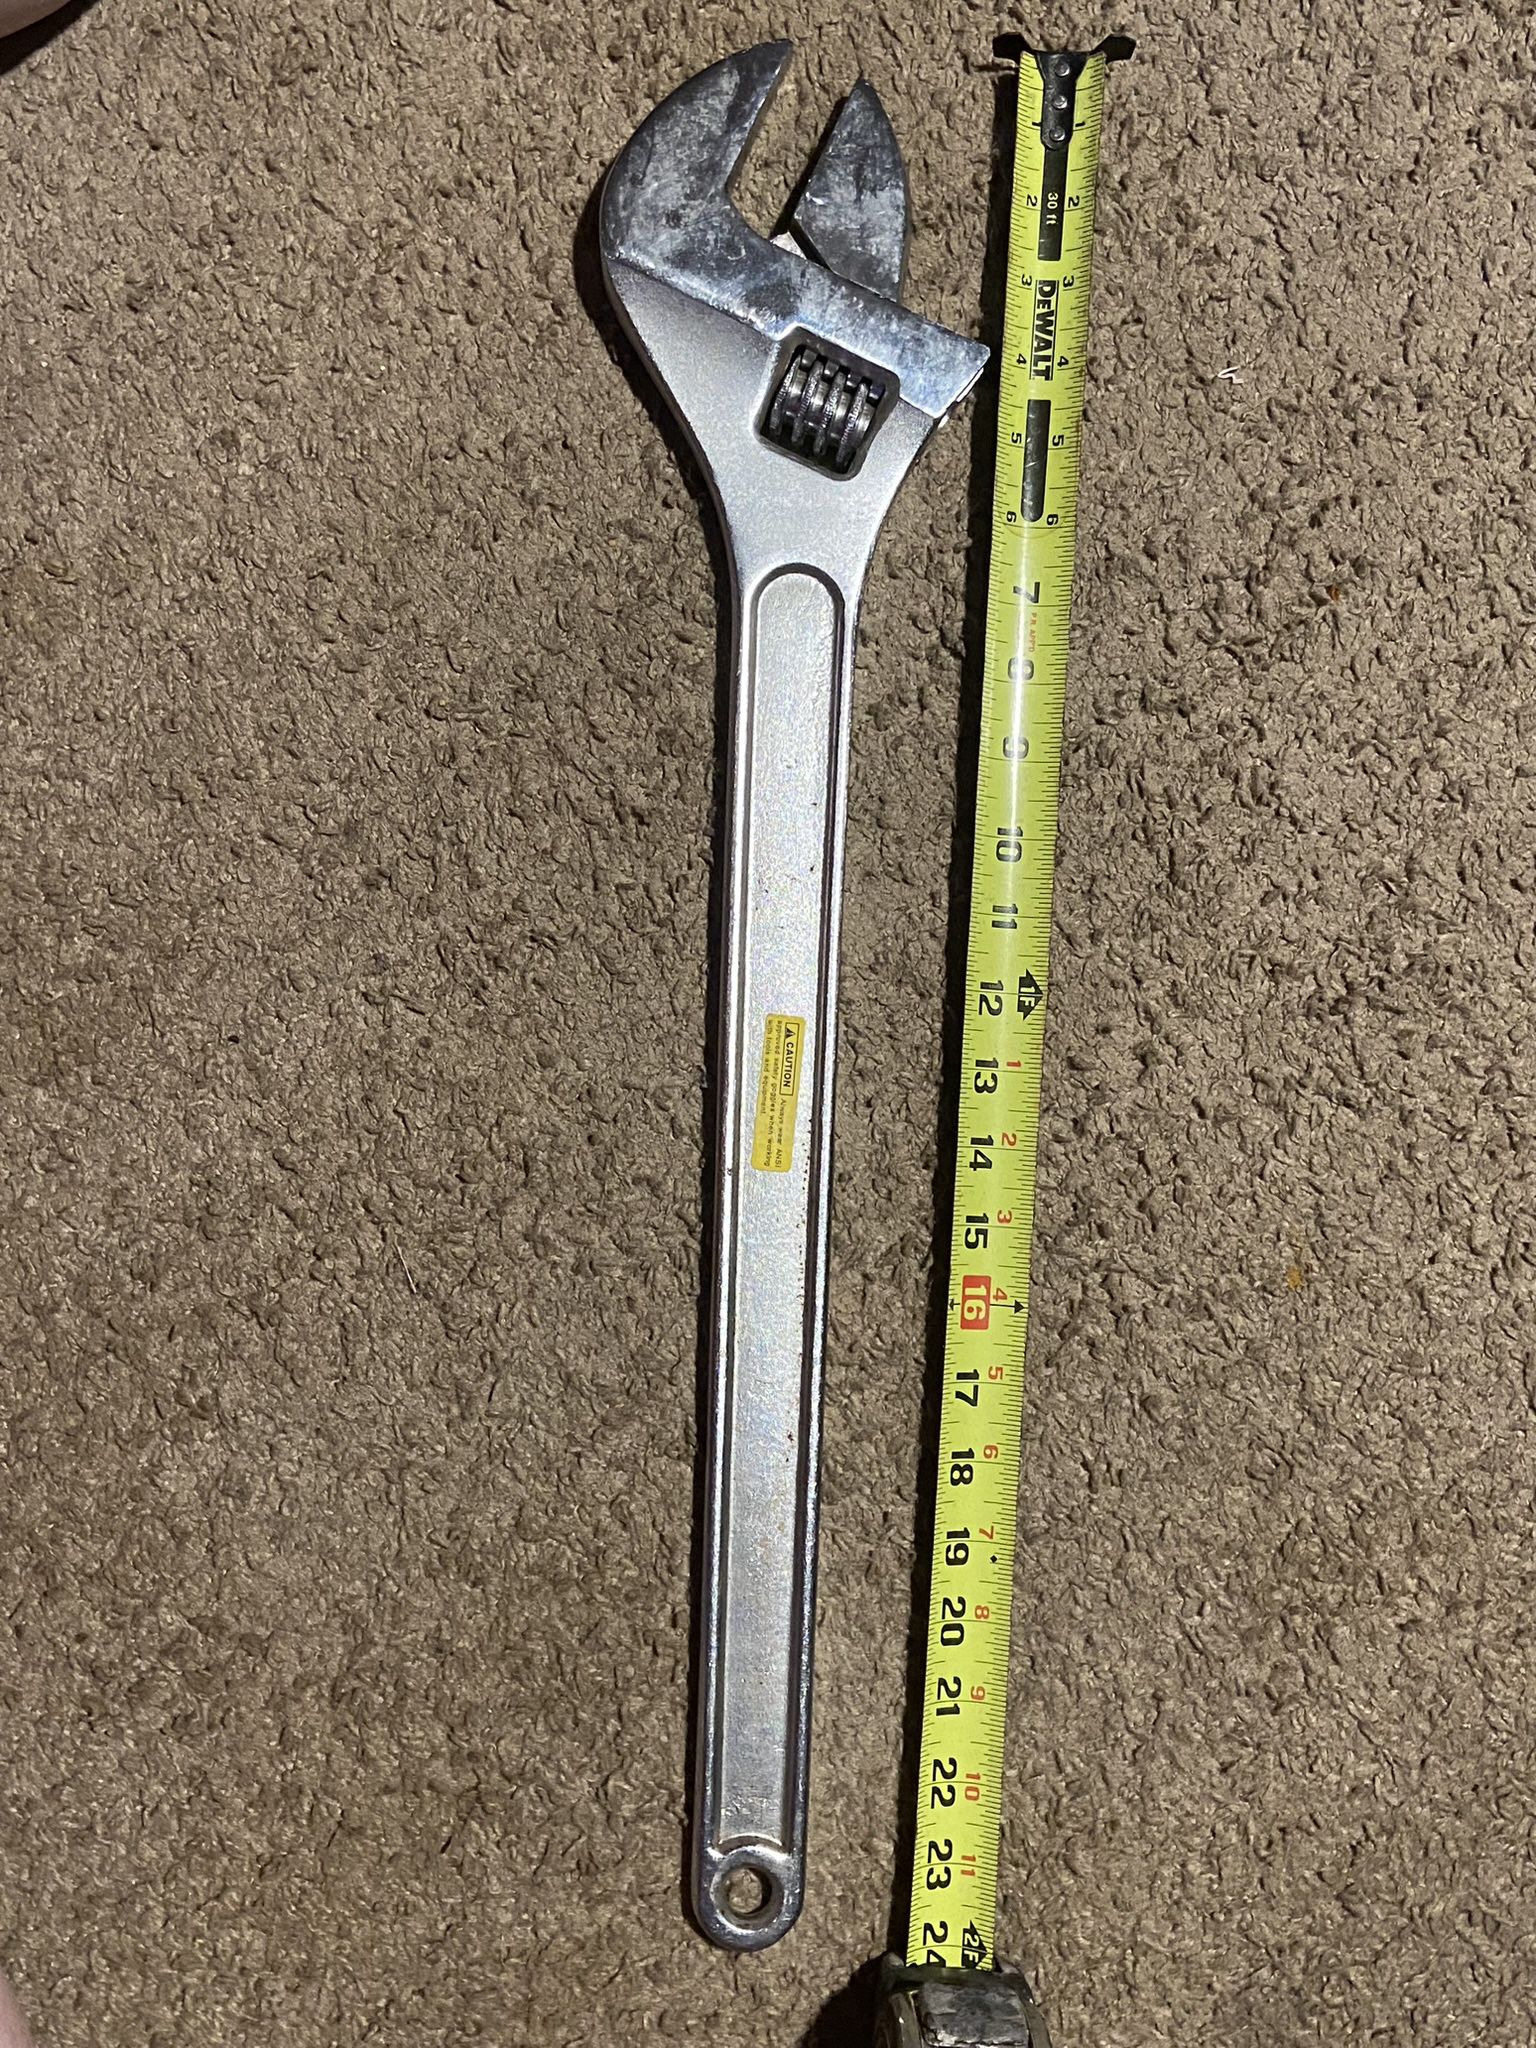 Pittsburgh Crescent 24 inch Adjustable Crome Wrench